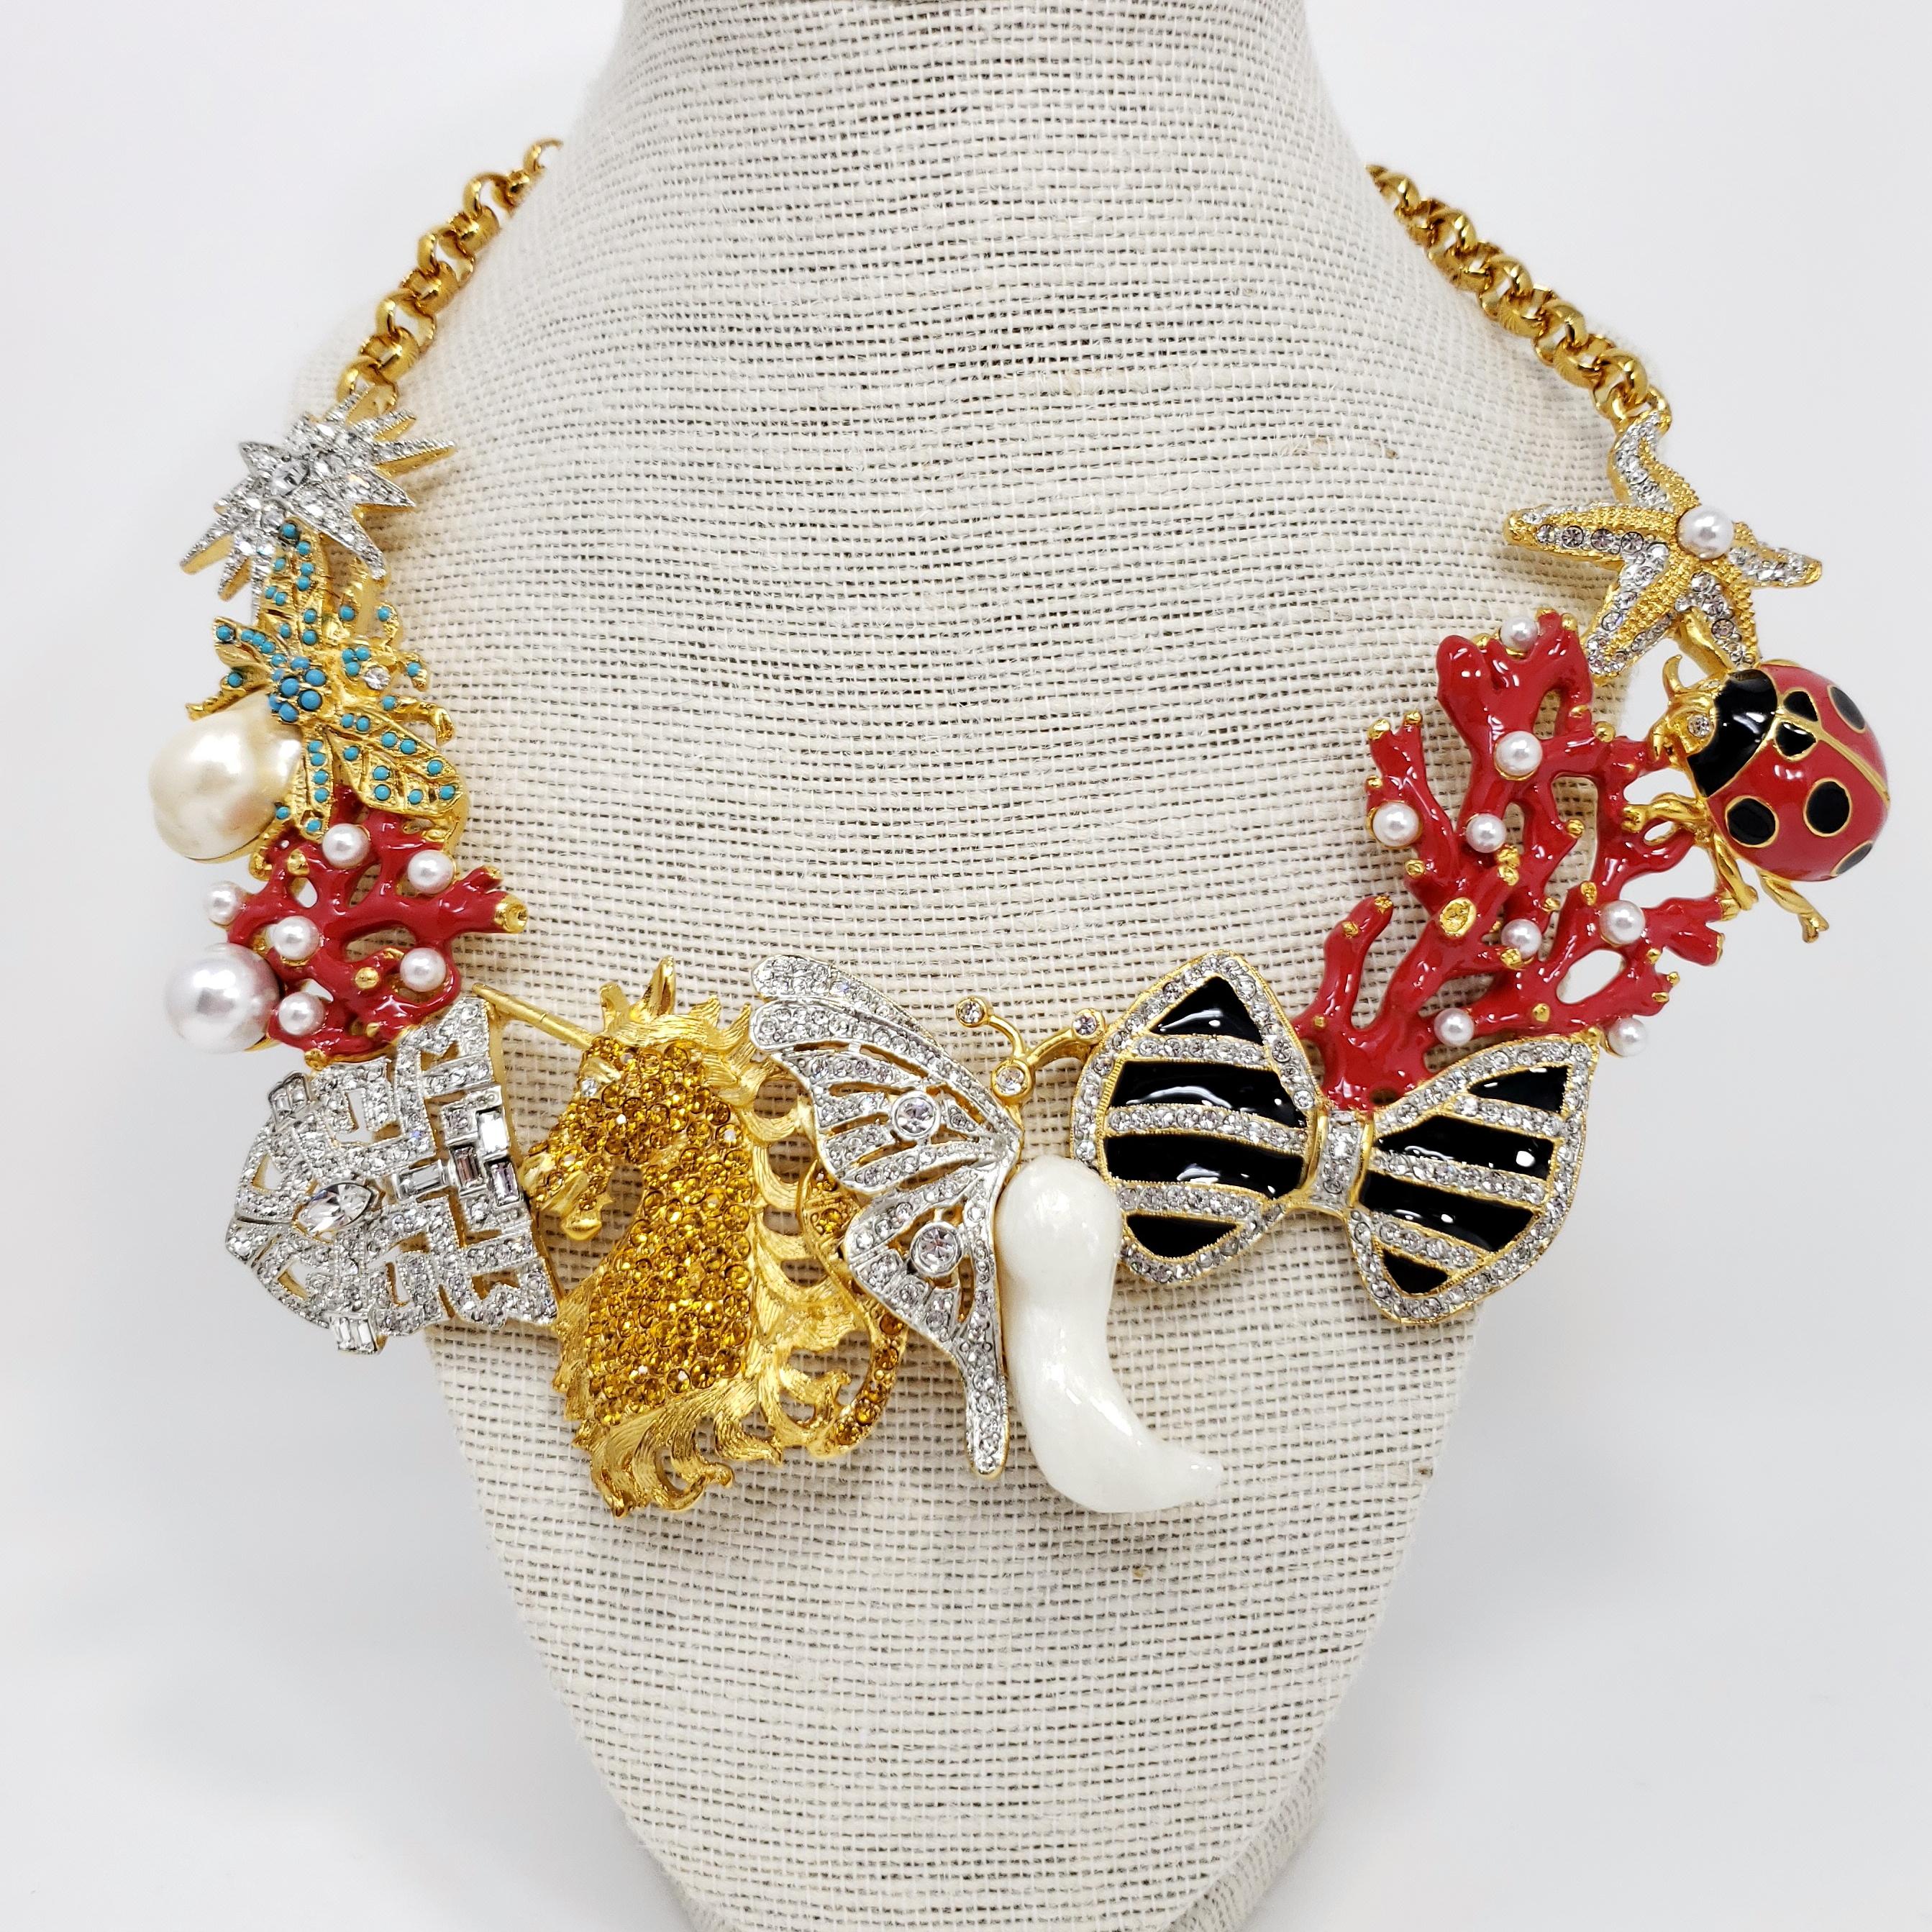 Kaleidoscope necklace by Kenneth Jay Lane. Signature KJL designs linked together to form a dazzling statement necklace!

Includes colorful star, fly, coral, art deco, unicorn, butterfly, bow, ladybug, and starfish motifs.

Features faux pearls,